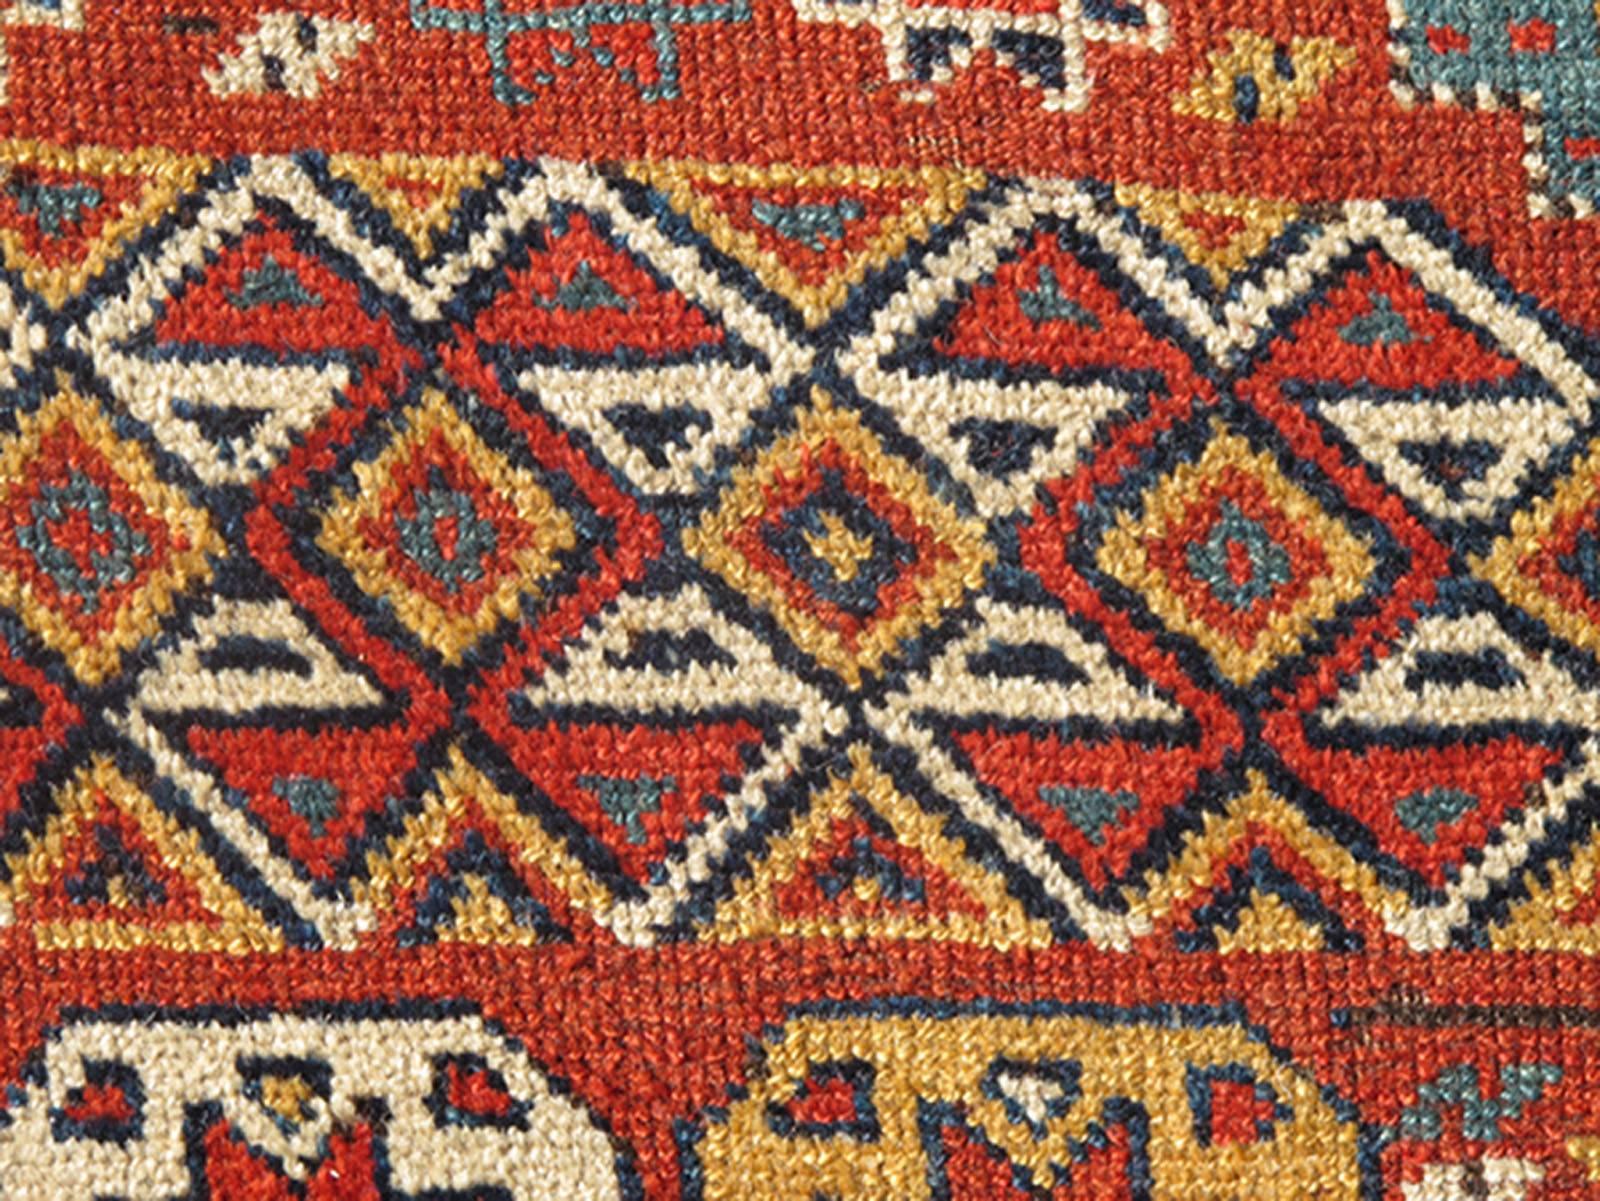 Caucasian Unique Antique Qashqai Rug with Geometric Motifs in Red, Blue, and Golden Yellow For Sale